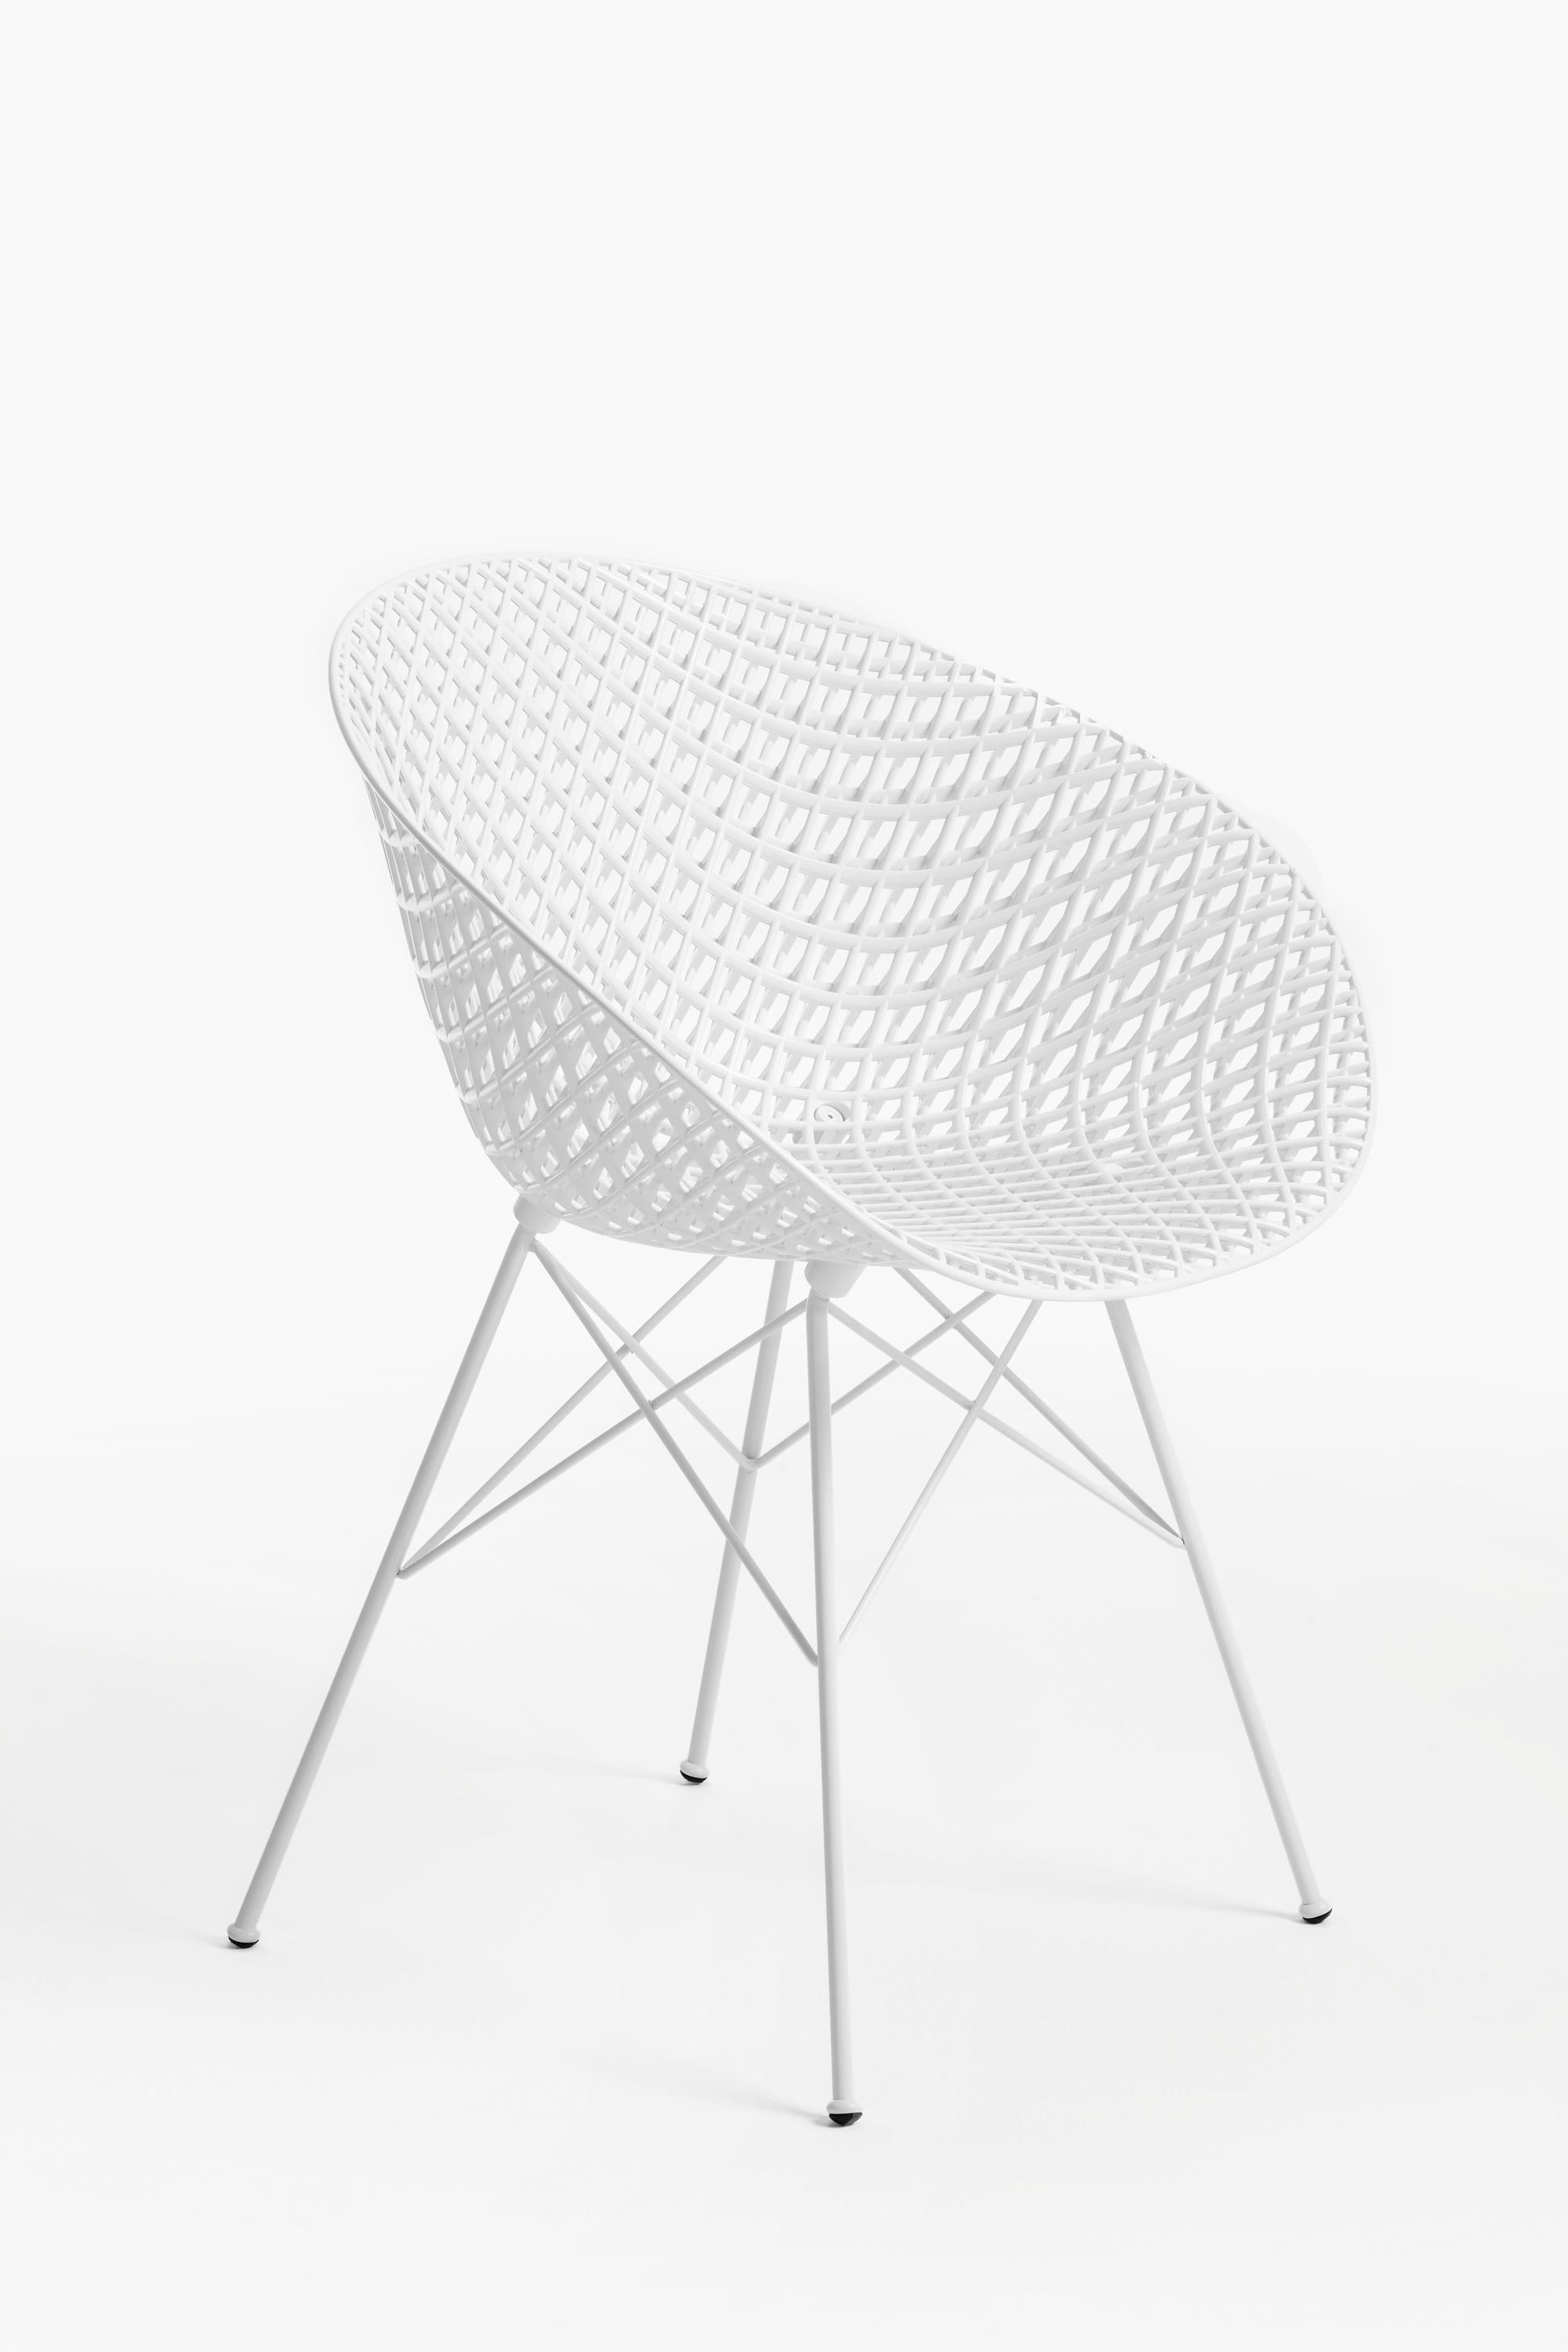 The constant interplay of design and technological innovation has led to the creation of Smatrik, the latest interpretation of a chair, designed by Tokujin Yoshioka. It has an innovative frame that creates a three-dimensional effect, which makes it